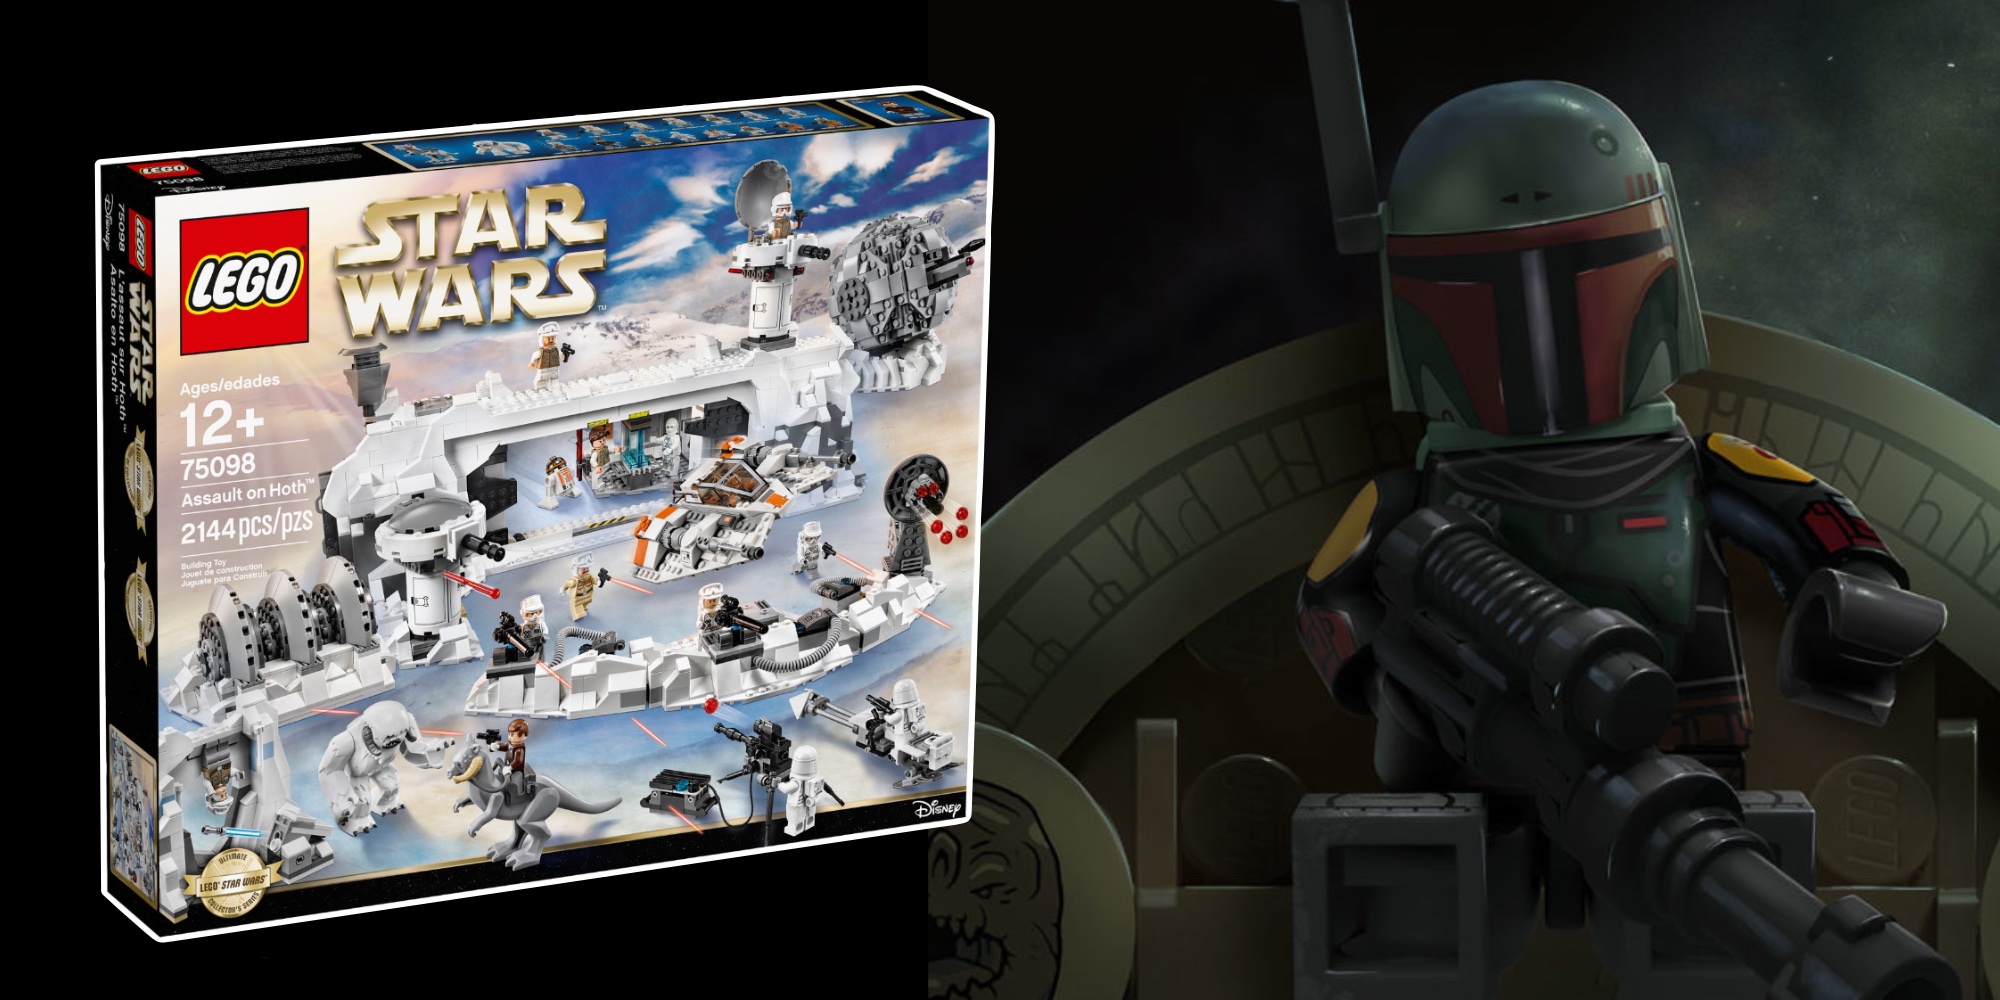 Lego Calendar August 2022 Lego Star Wars Summer 2022 Lineup: What To Expect - 9To5Toys